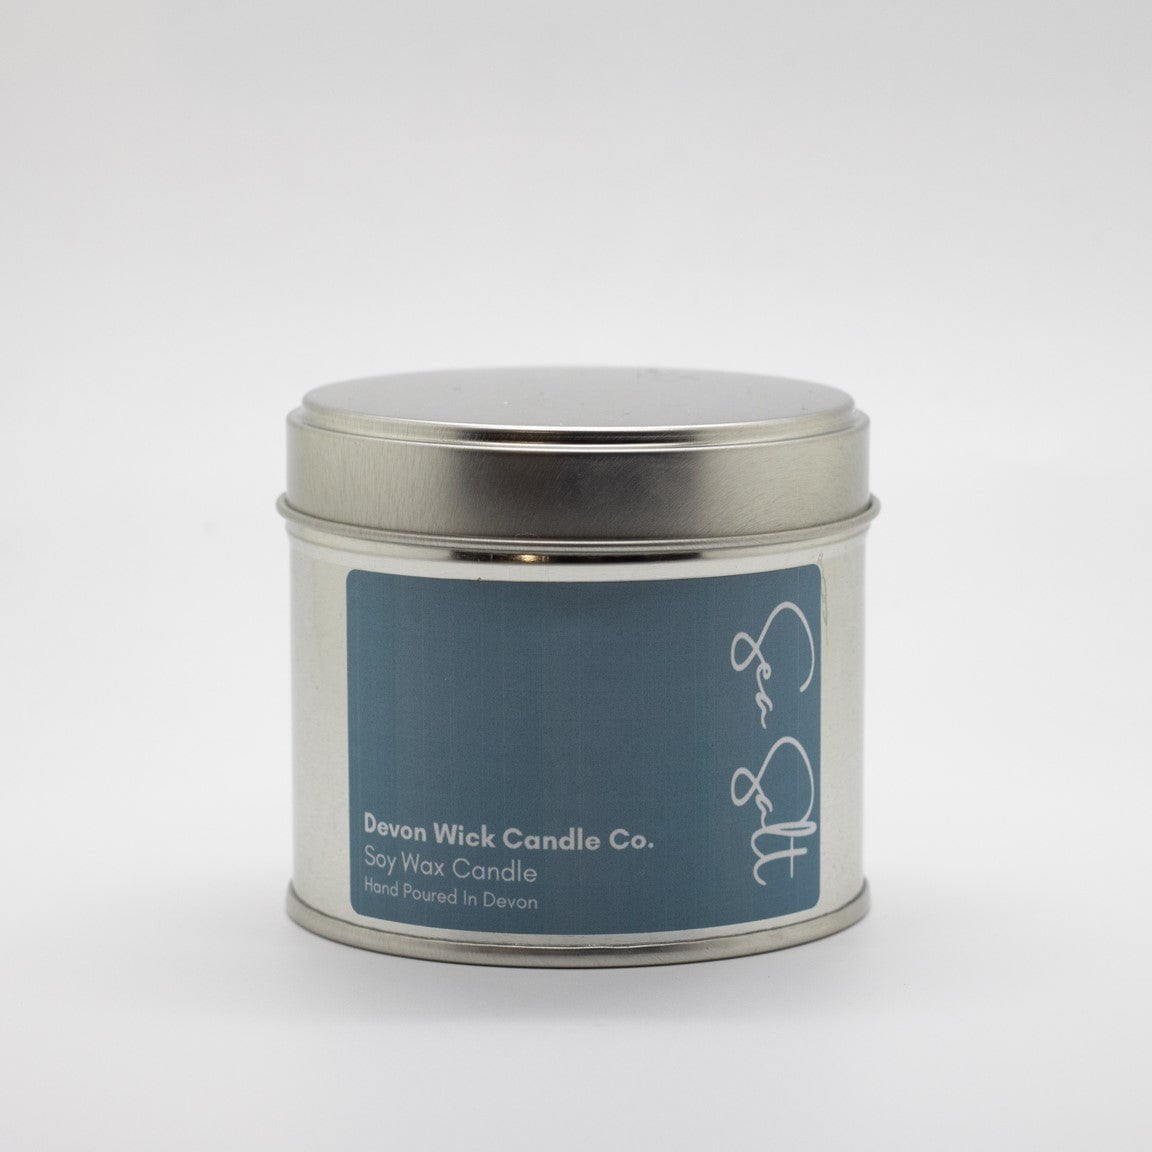 Devon Wick Candle Co. Limited Sea Salt Soy Wax Tinned Candle